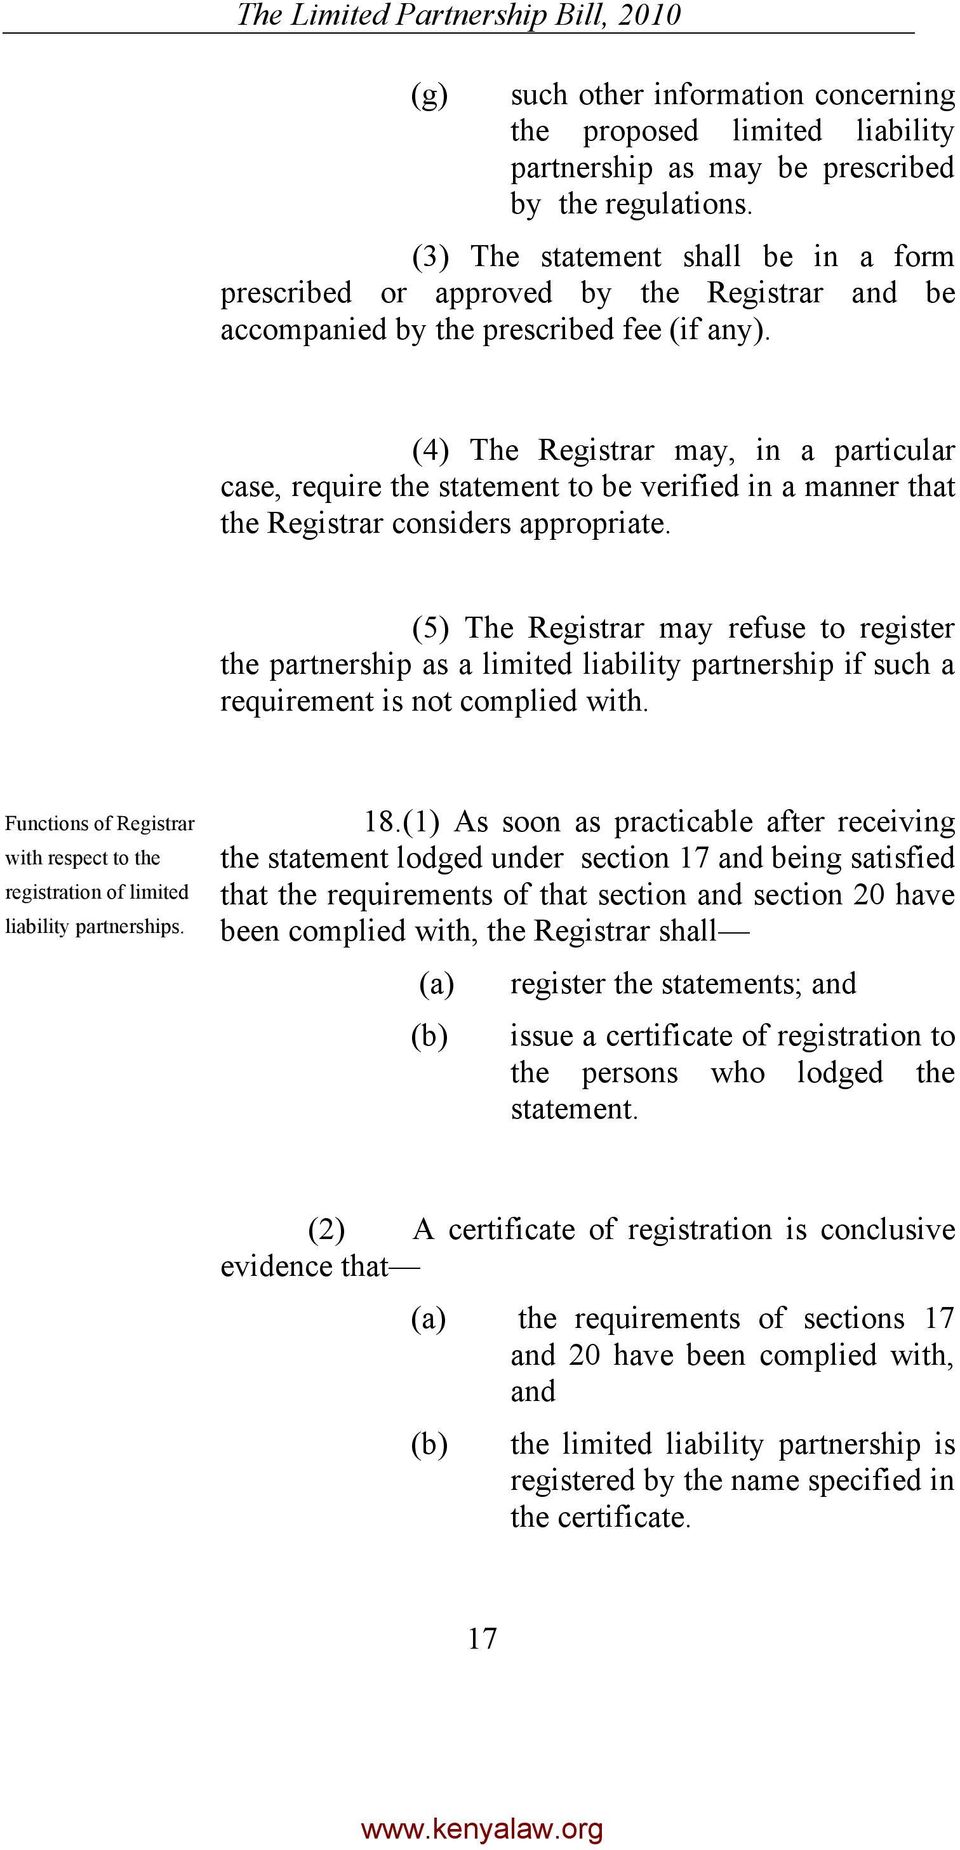 (4) The Registrar may, in a particular case, require the statement to be verified in a manner that the Registrar considers appropriate.